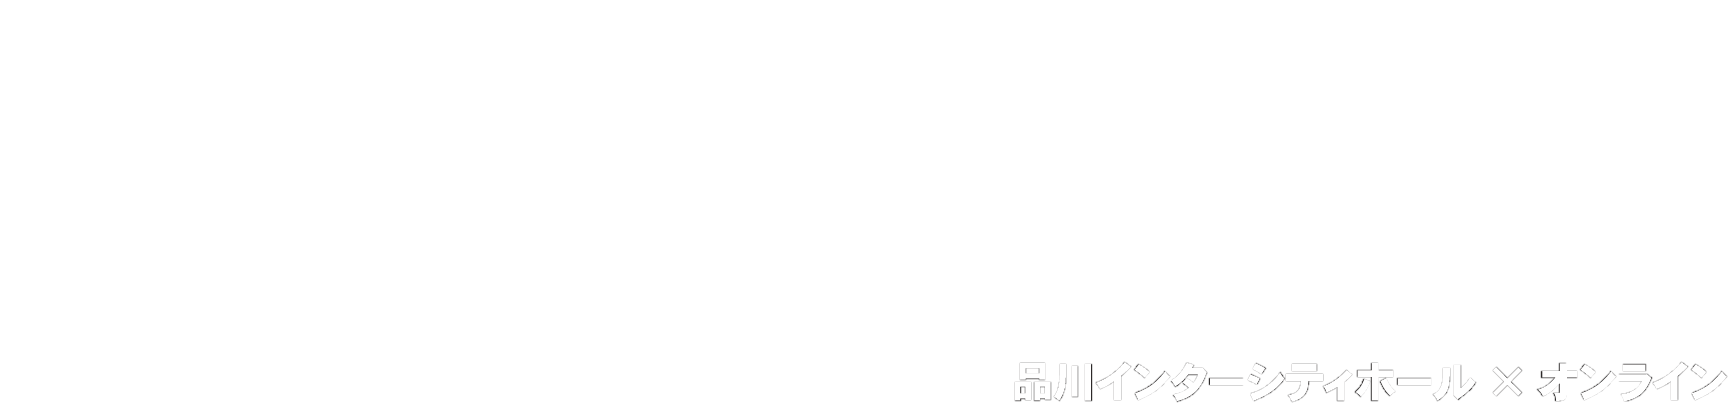 All about FORUM8 Products. 16th FORUM8 DESIGN FESTIVAL 2022 3DAYS+EVE 11.16WED-18FRI EVE11.15TUE 第16回フォーラムエイトデザインフェスティバル 品川インターシティホール